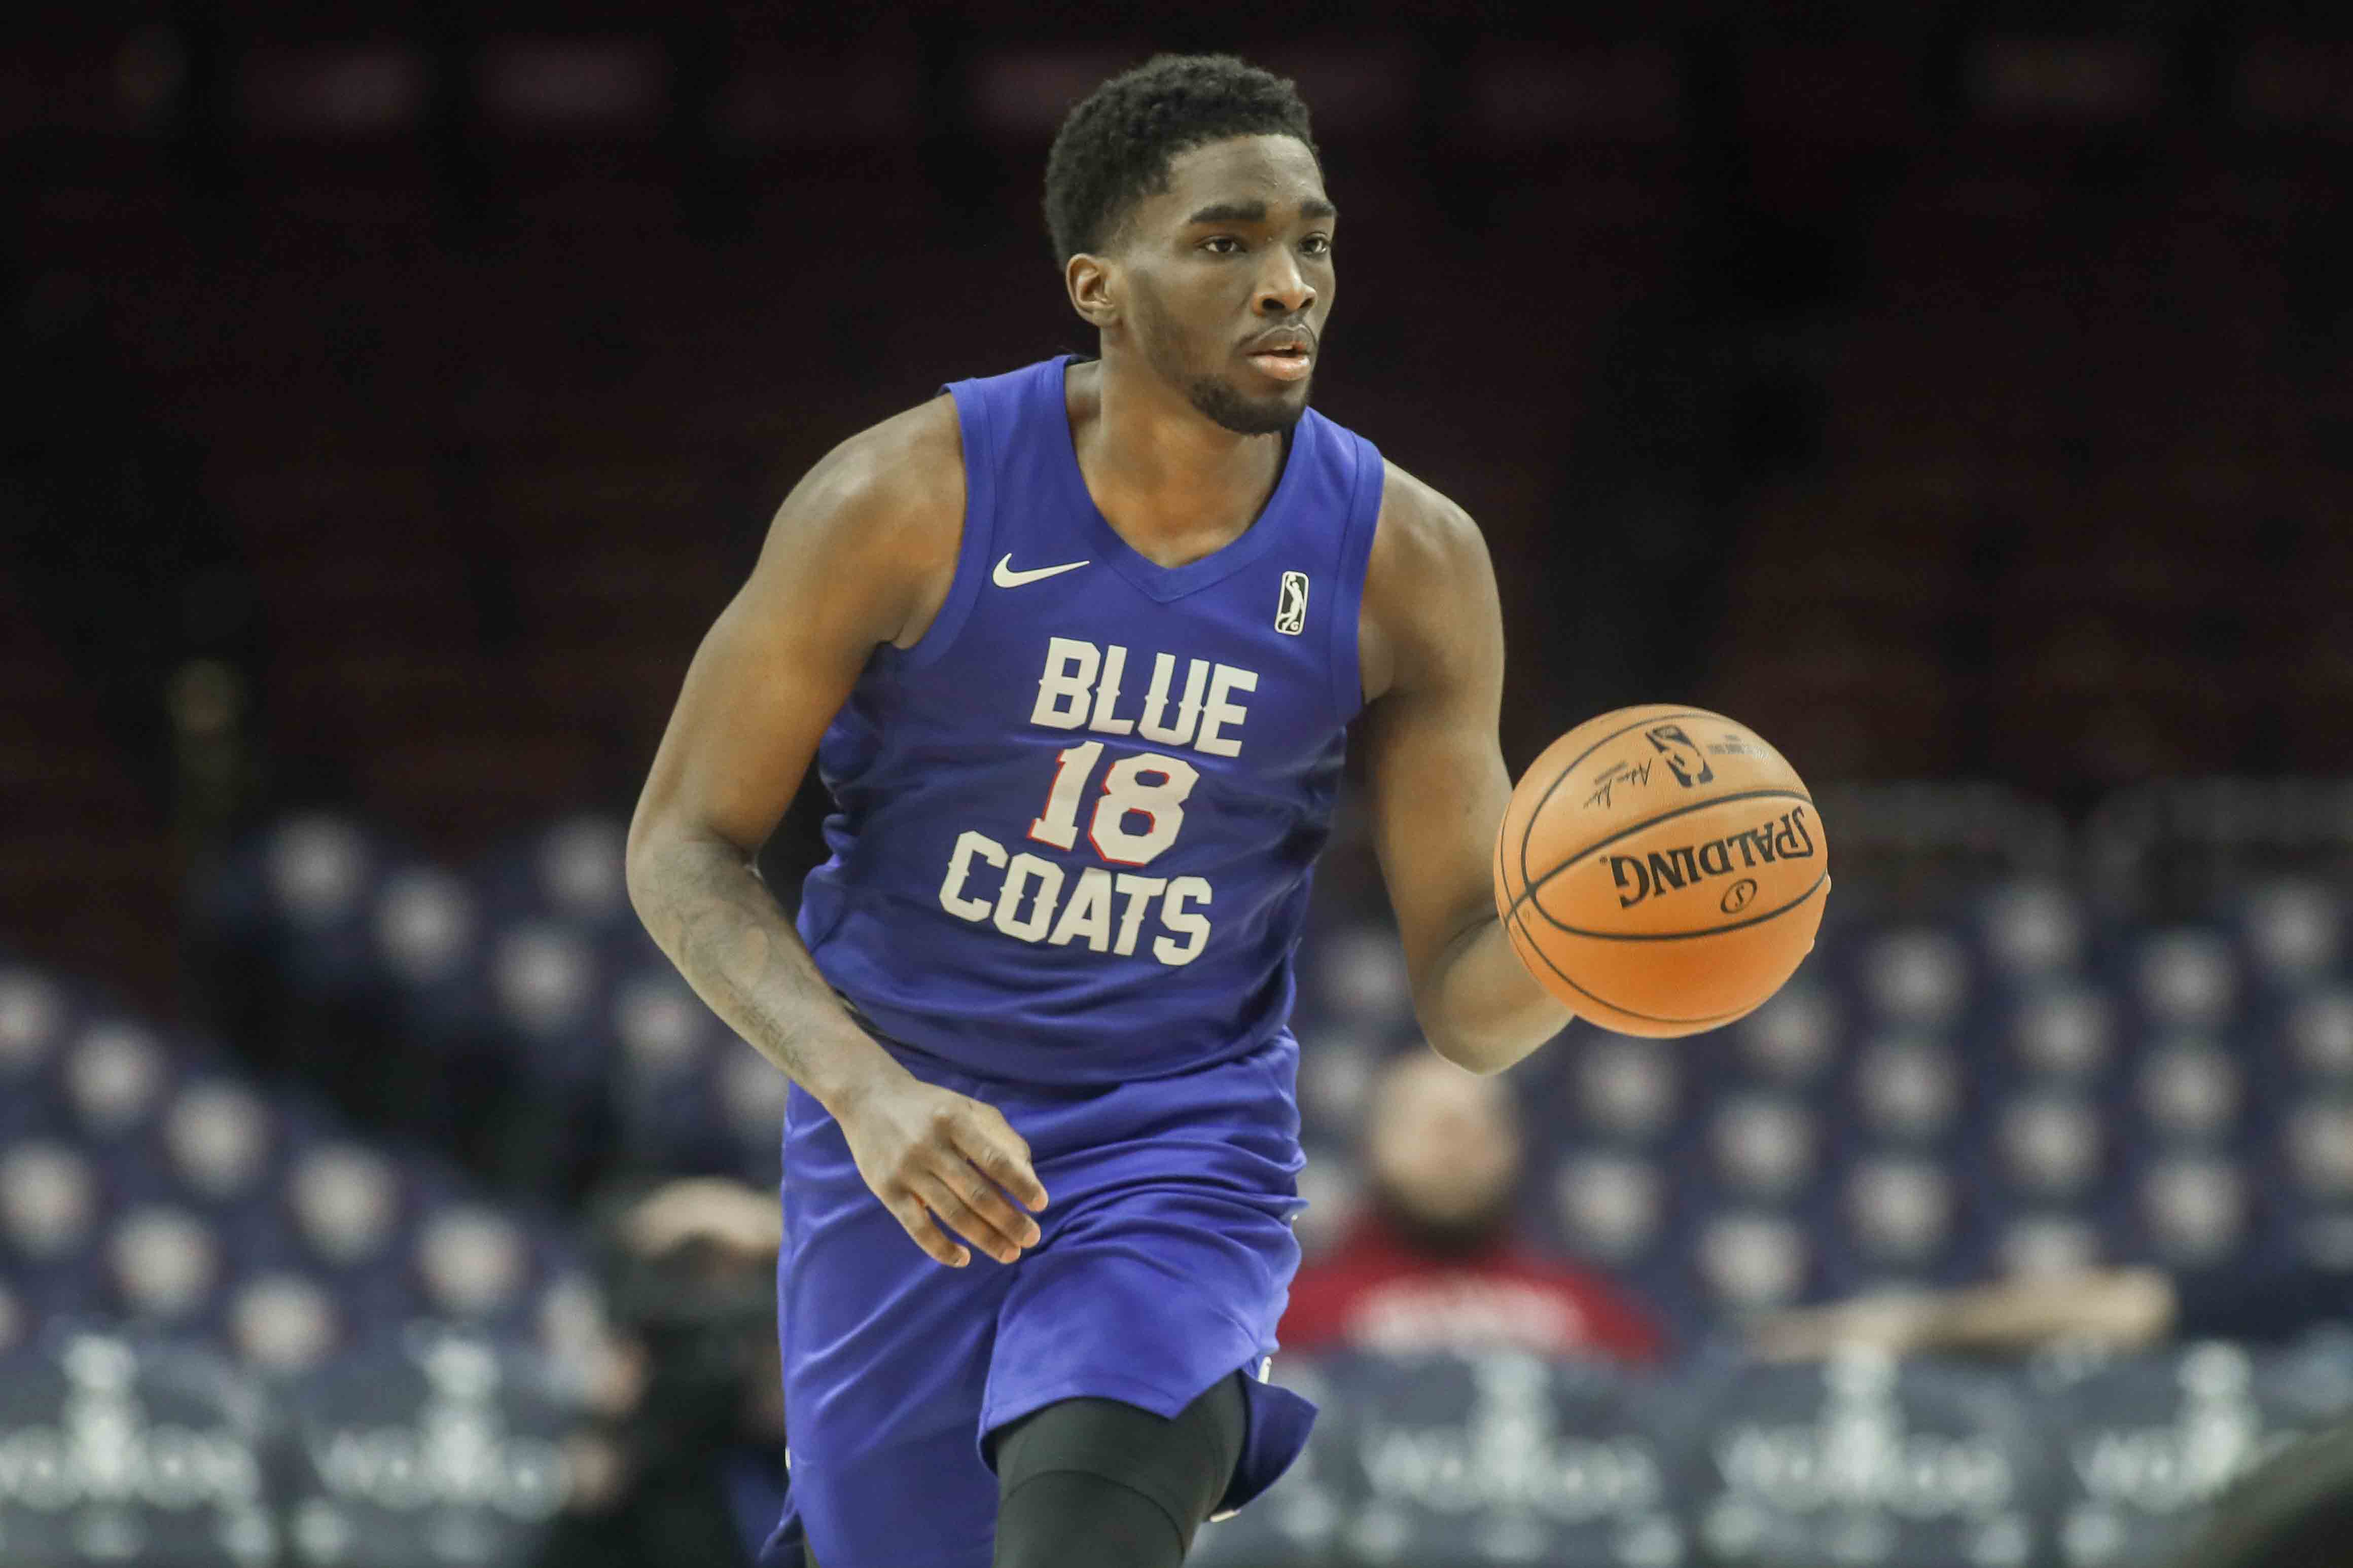 Delaware Blue Coats Score a Season-High in Their 146-111 Victory